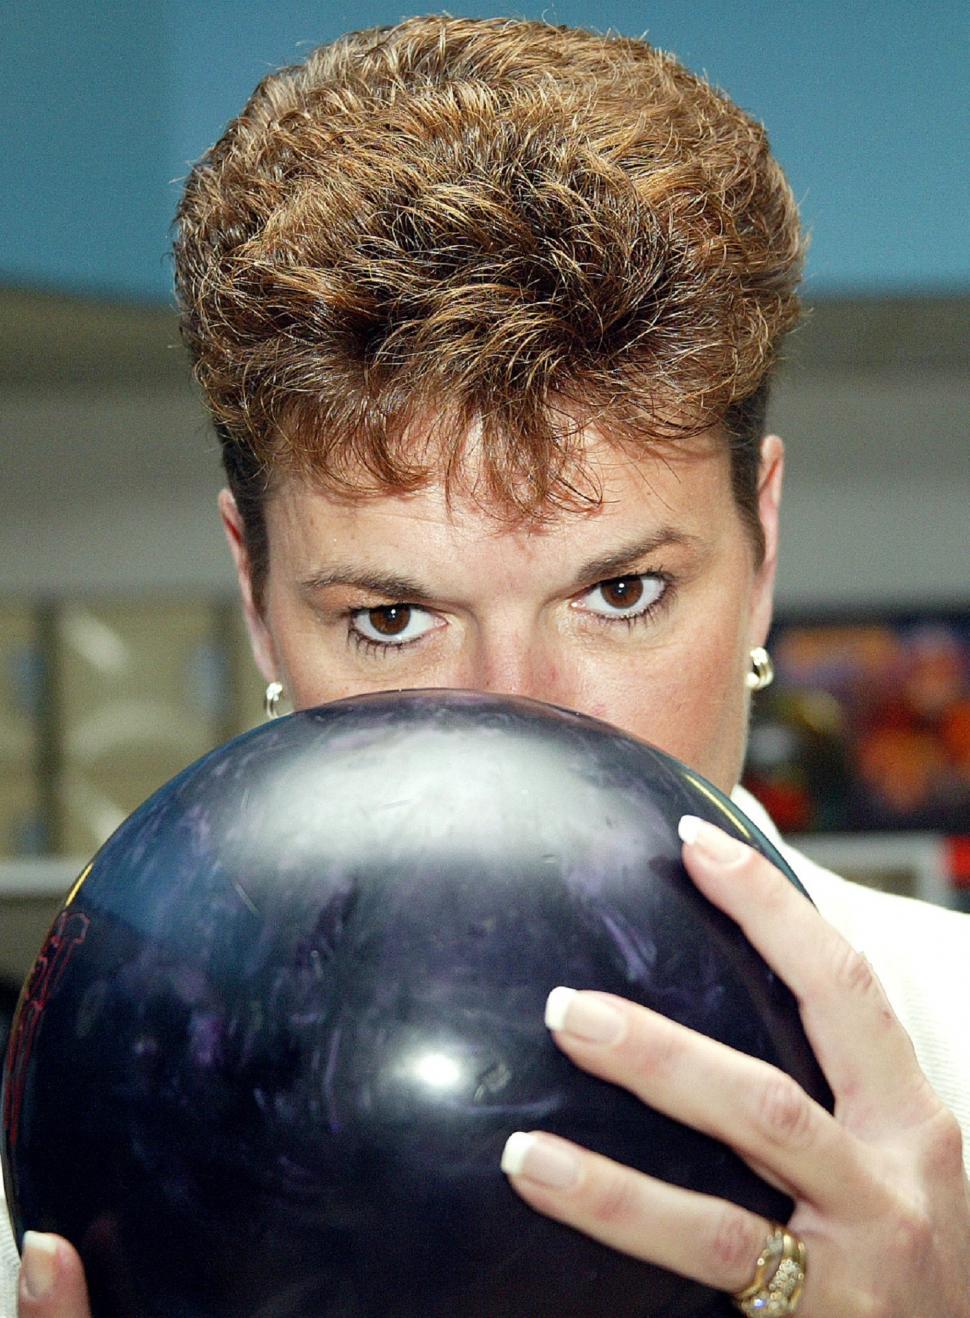 Free Image of Woman Holding Bowling Ball to Face 